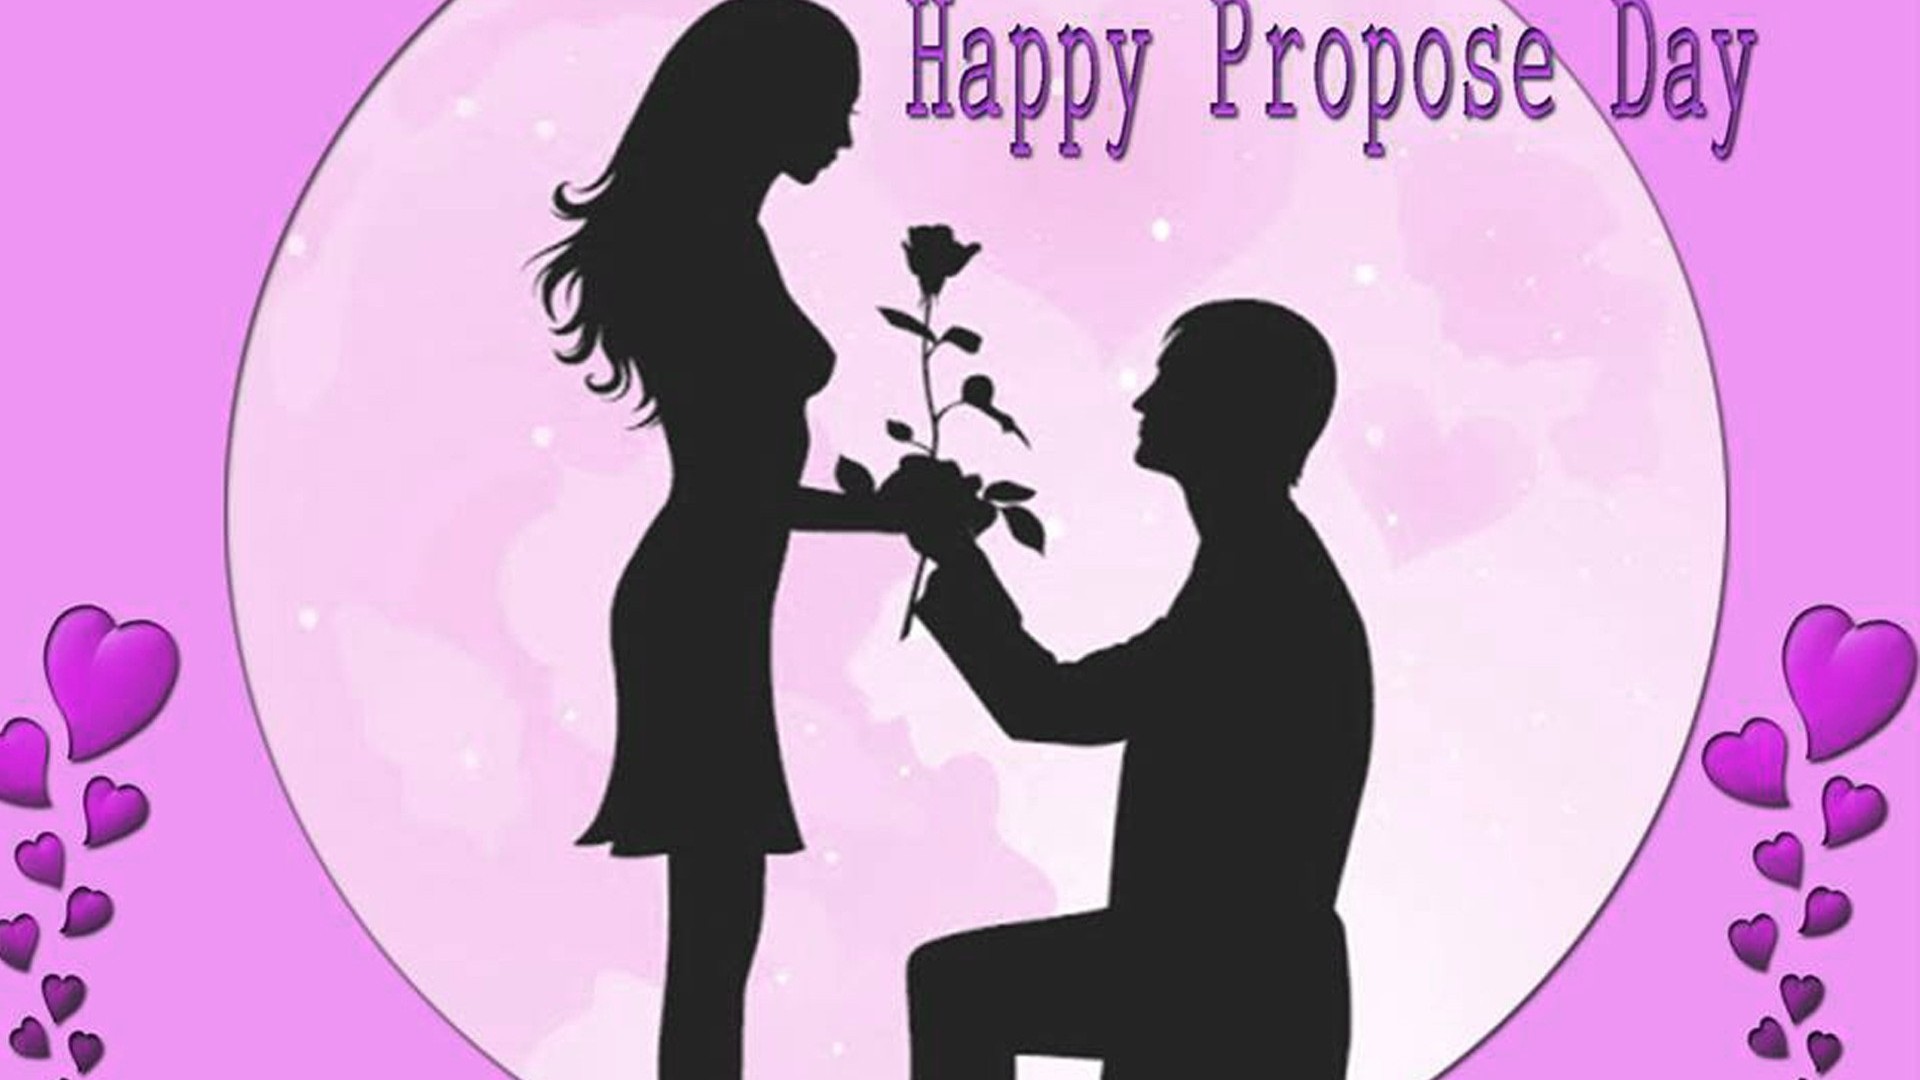 Beautiful Propose Day Wallpaper - Happy Propose Day Image Download , HD Wallpaper & Backgrounds